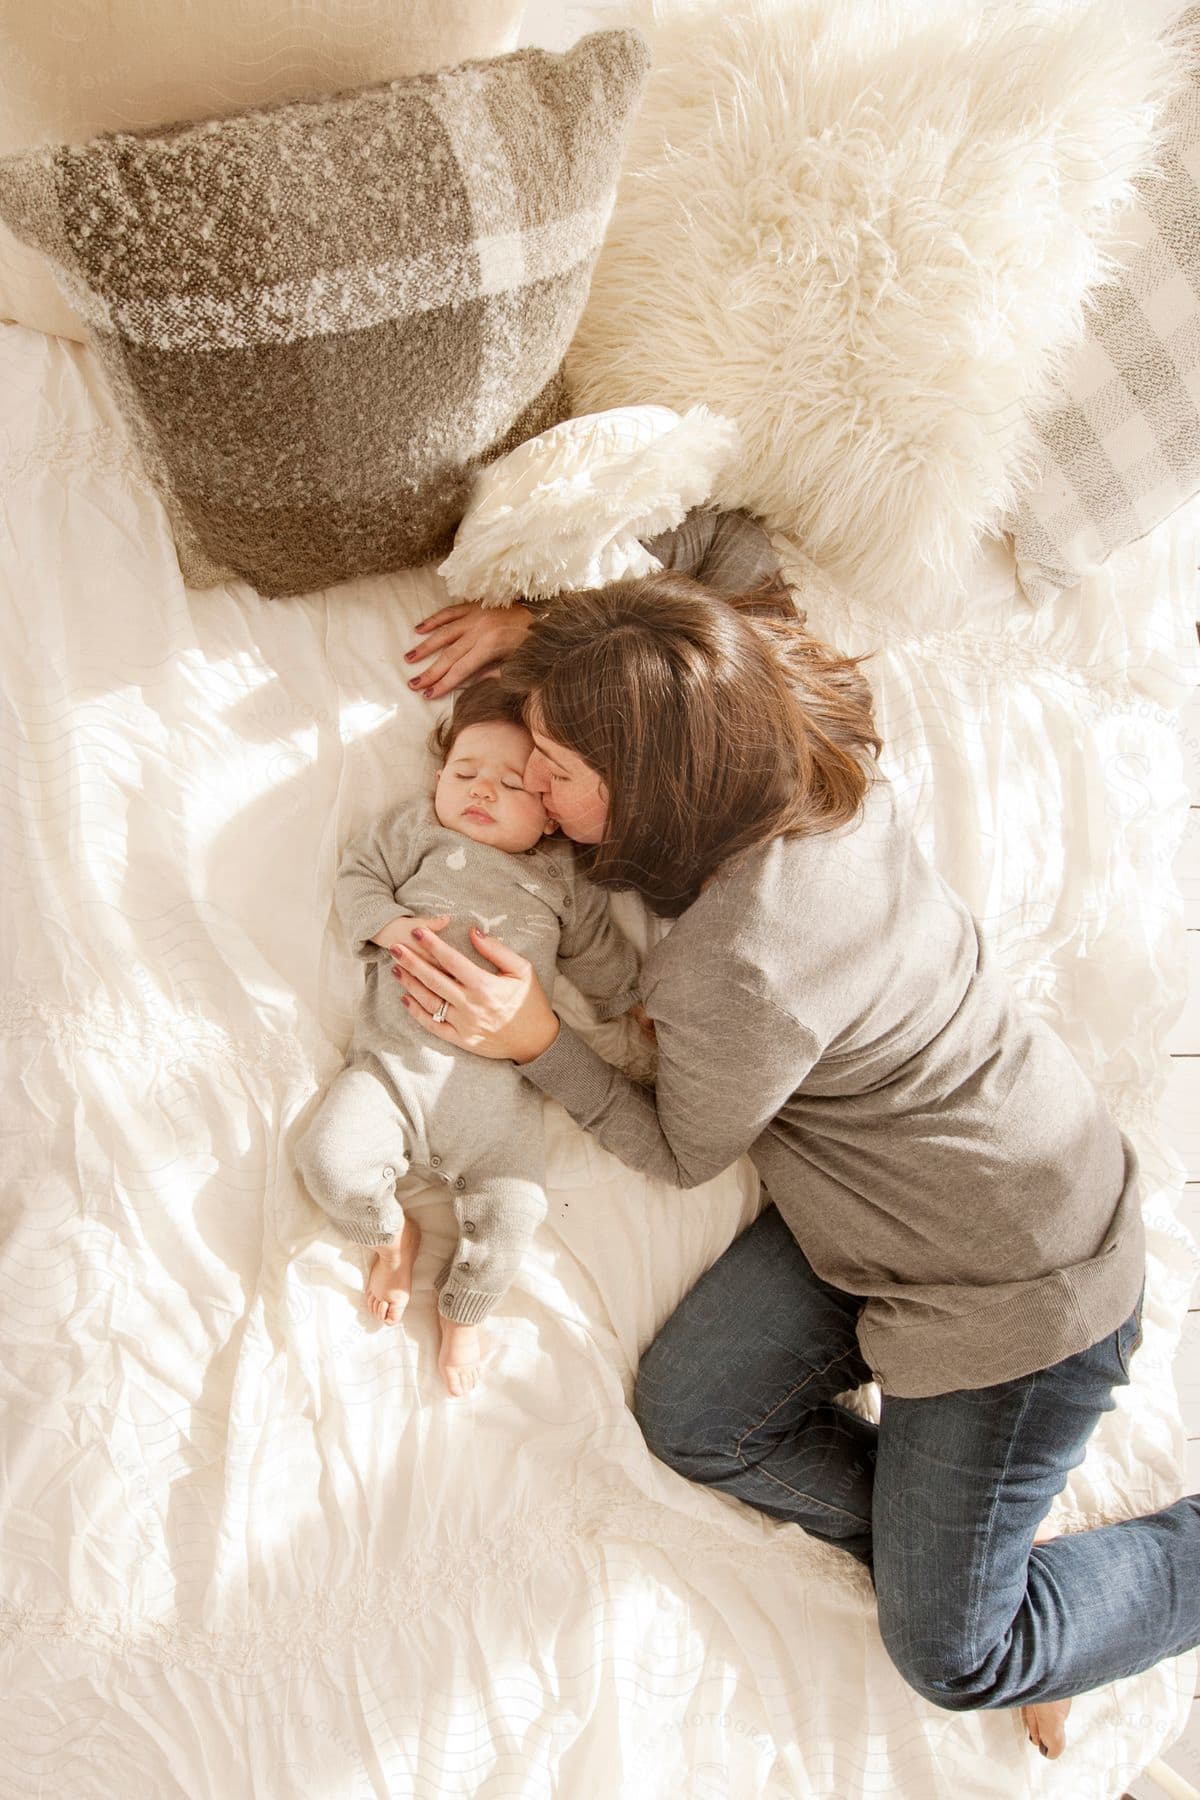 A mother and child sleeping together in a bed